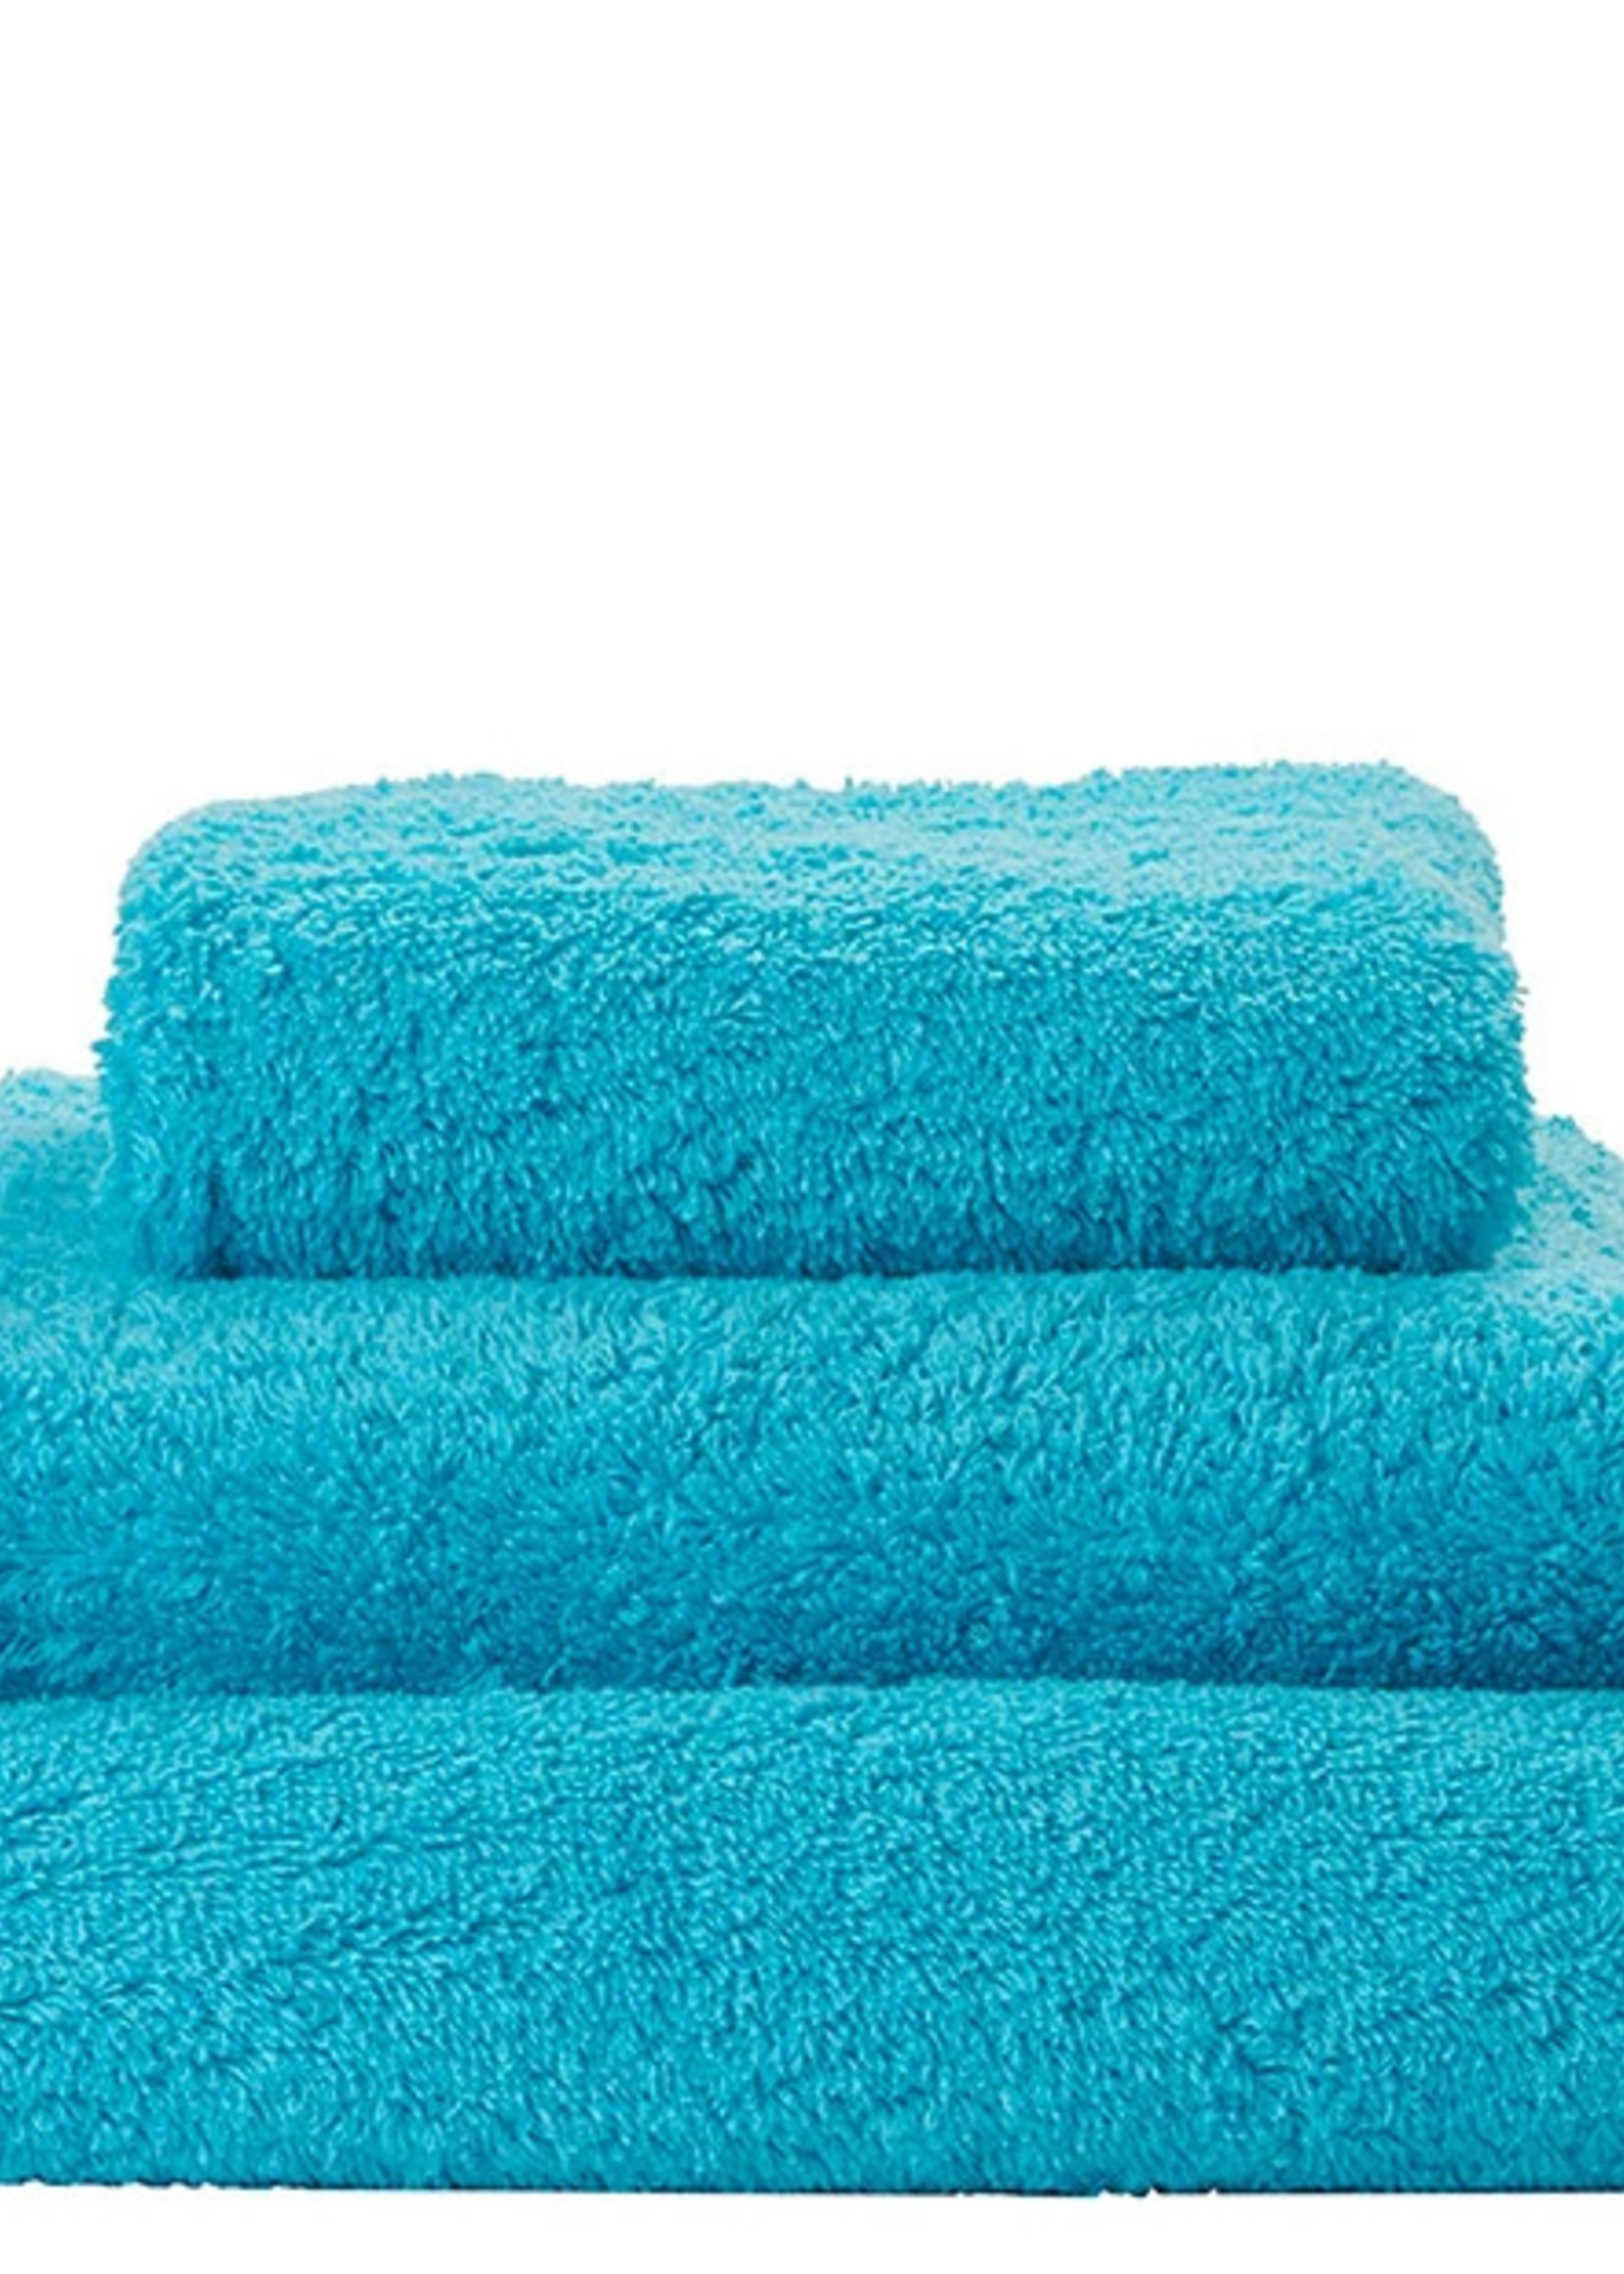 Abyss & Habidecor Super Pile Turquoise Towels